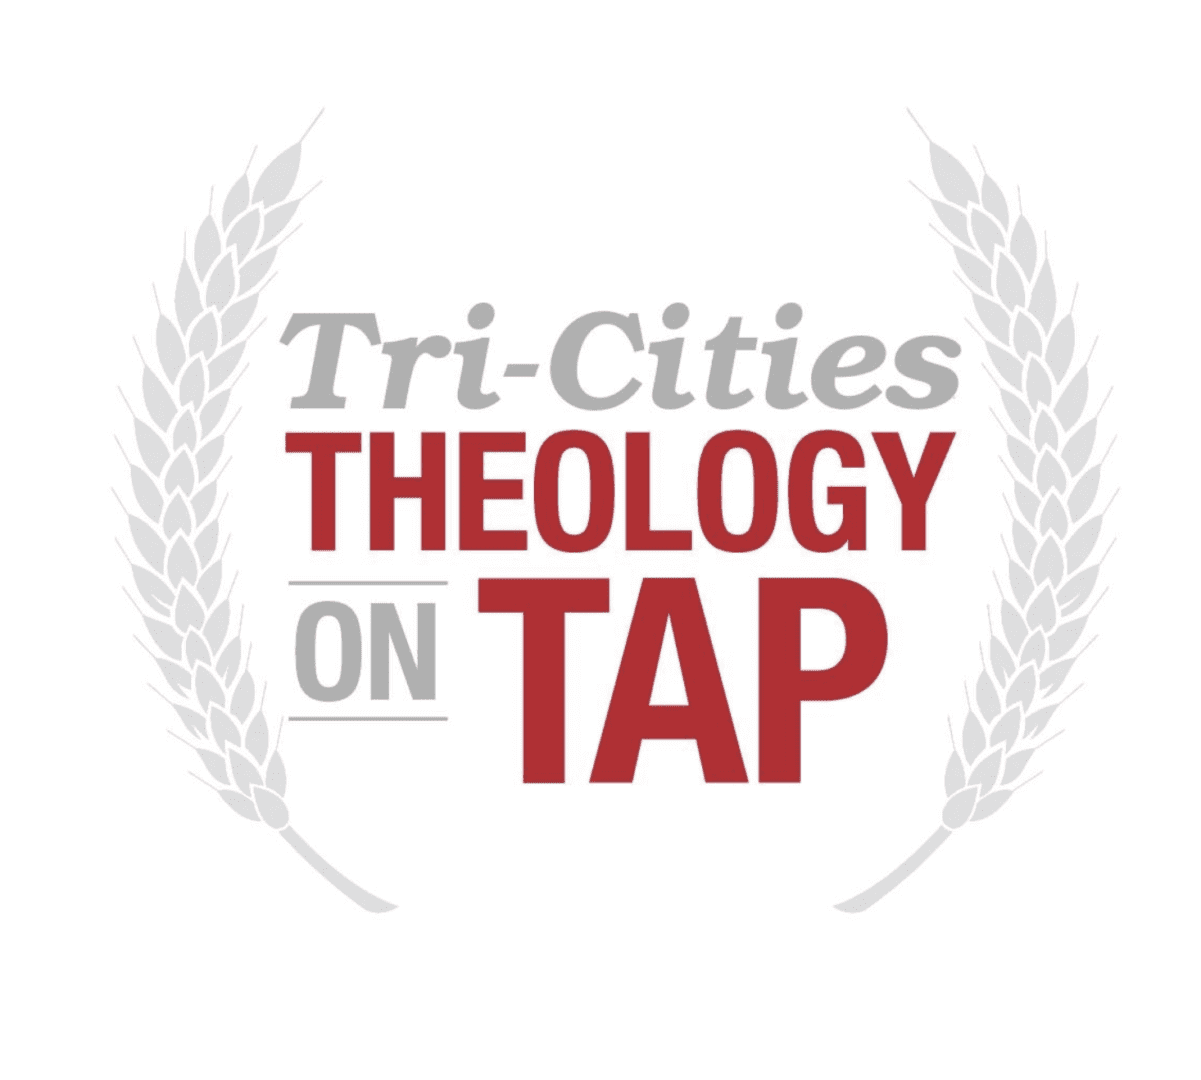 Tri Cities Theology on Tap event on April